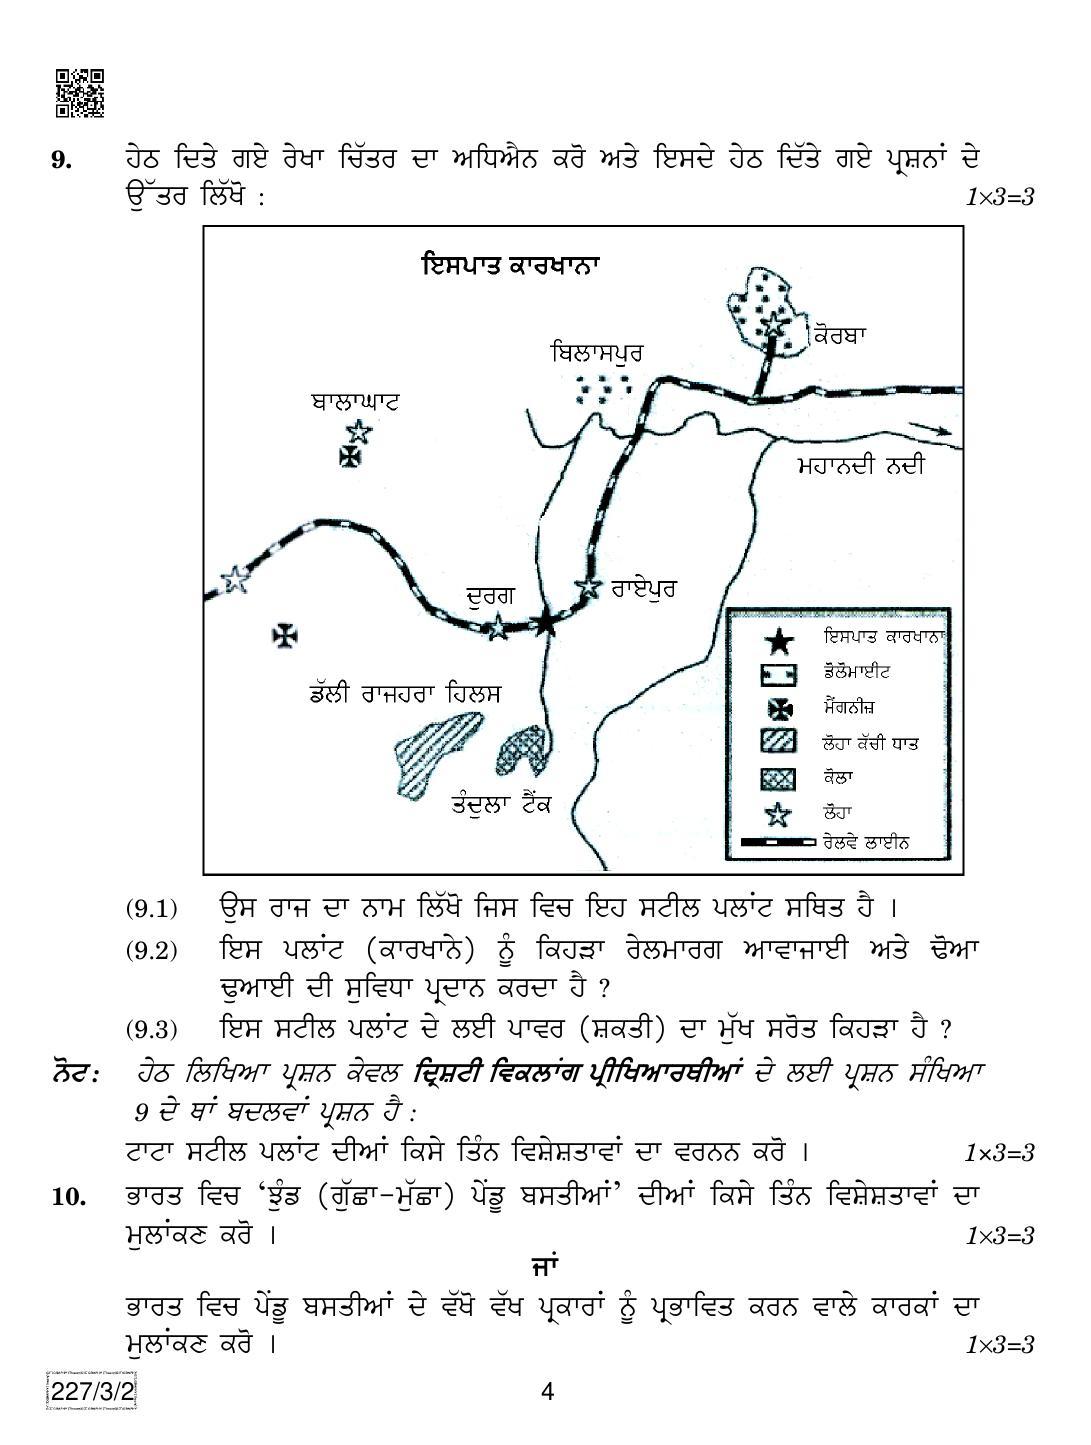 CBSE Class 12 227-3-2 Geography (Punjabi) 2019 Question Paper - Page 4